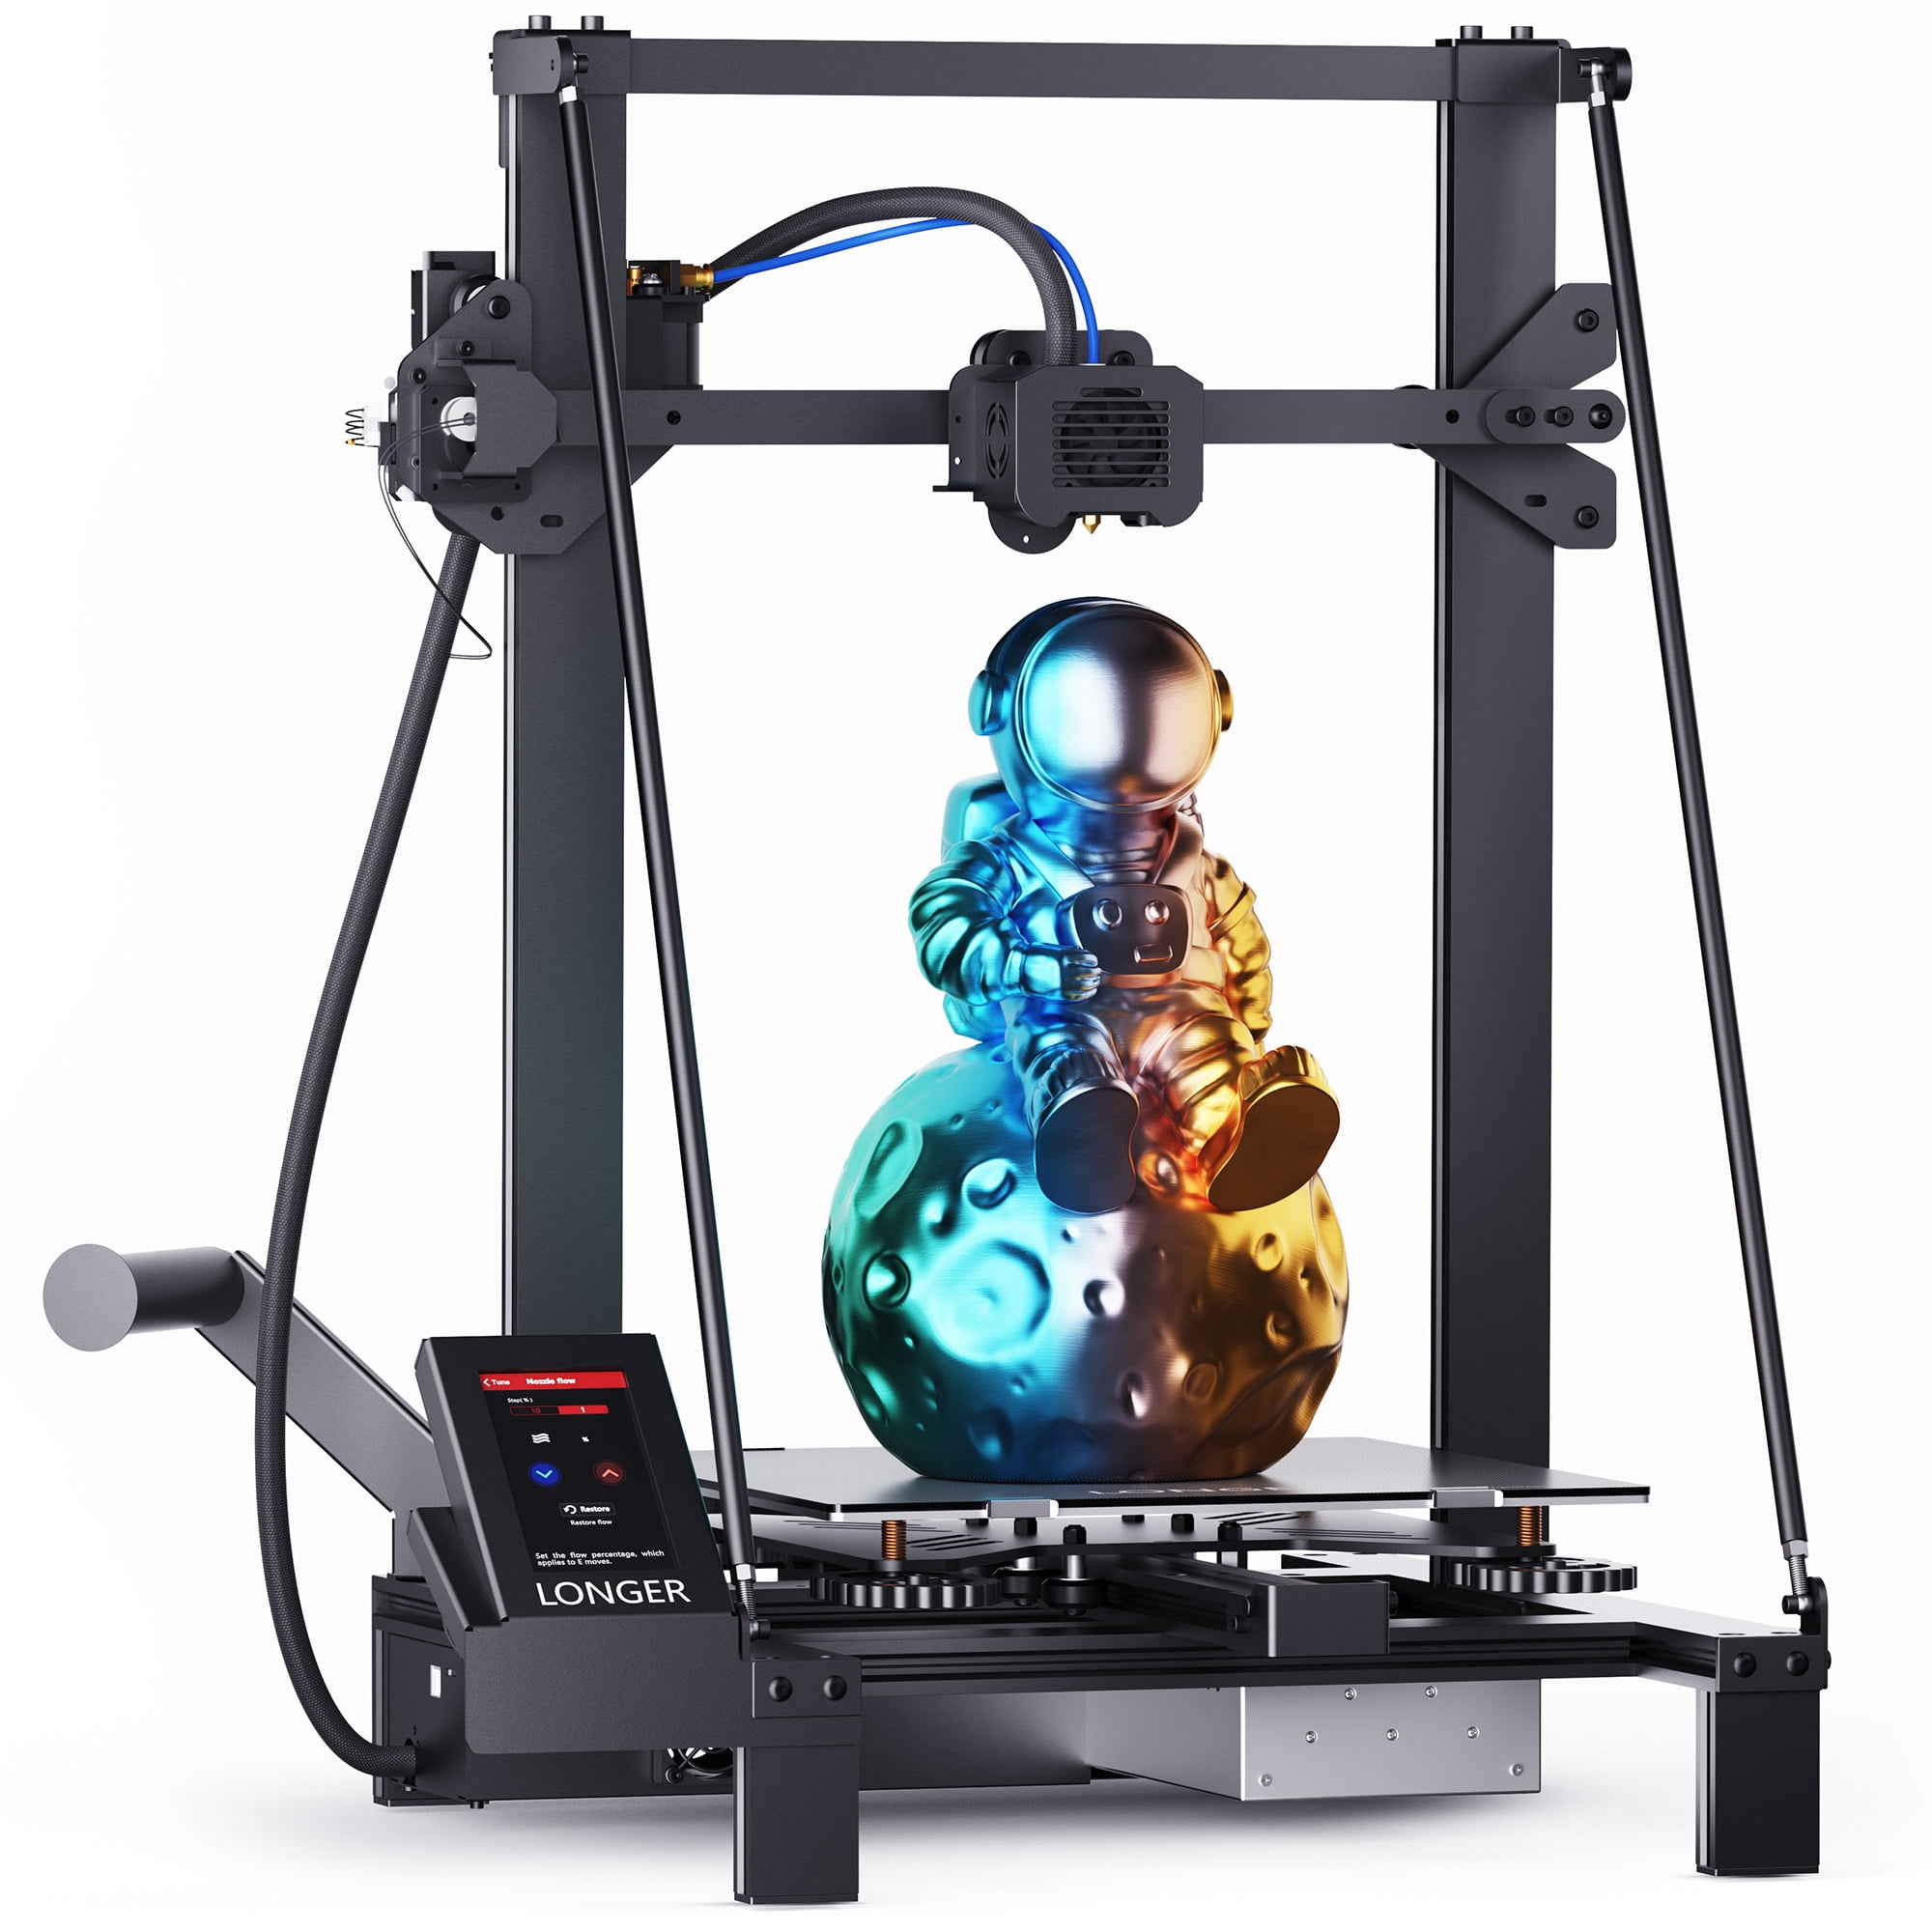 Sovol SV06 Plus 3D Printer Coming with 1 Spool 1kg Blue PLA Filament, 300℃  High Temp 150mm/s High Speed All Metal Hotend, Dual Gear Direct Drive Touch  Screen Auto Leveling 11.8x11.8x13.4 inch